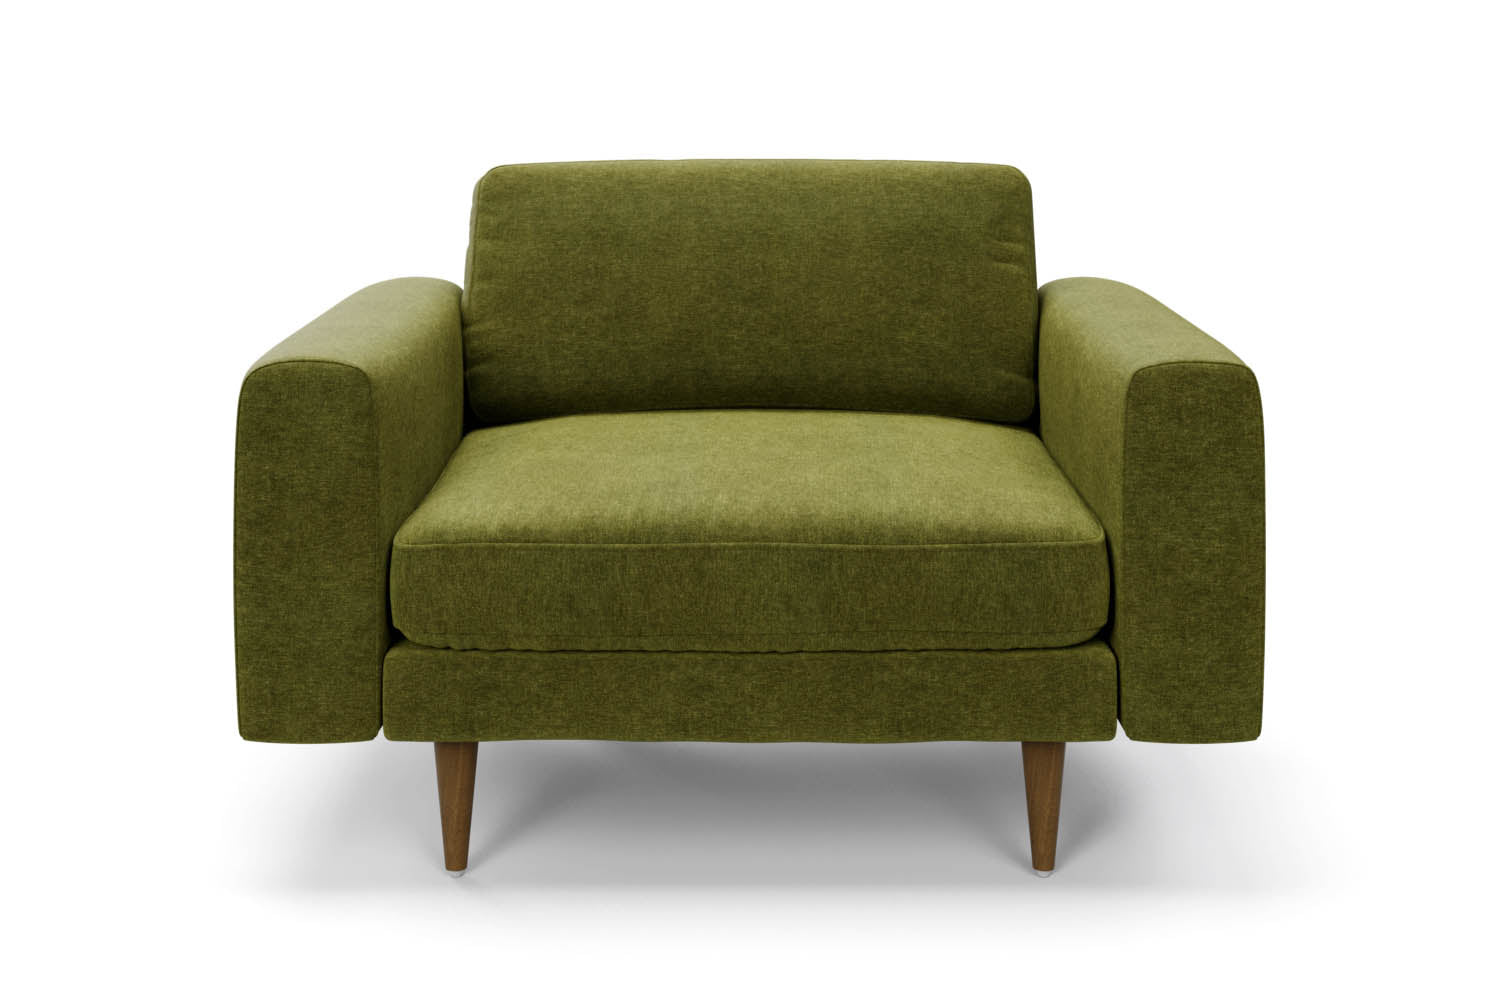 The Big Chill Snuggler in Moss Chenille with brown legs frontvariant_40886286975024